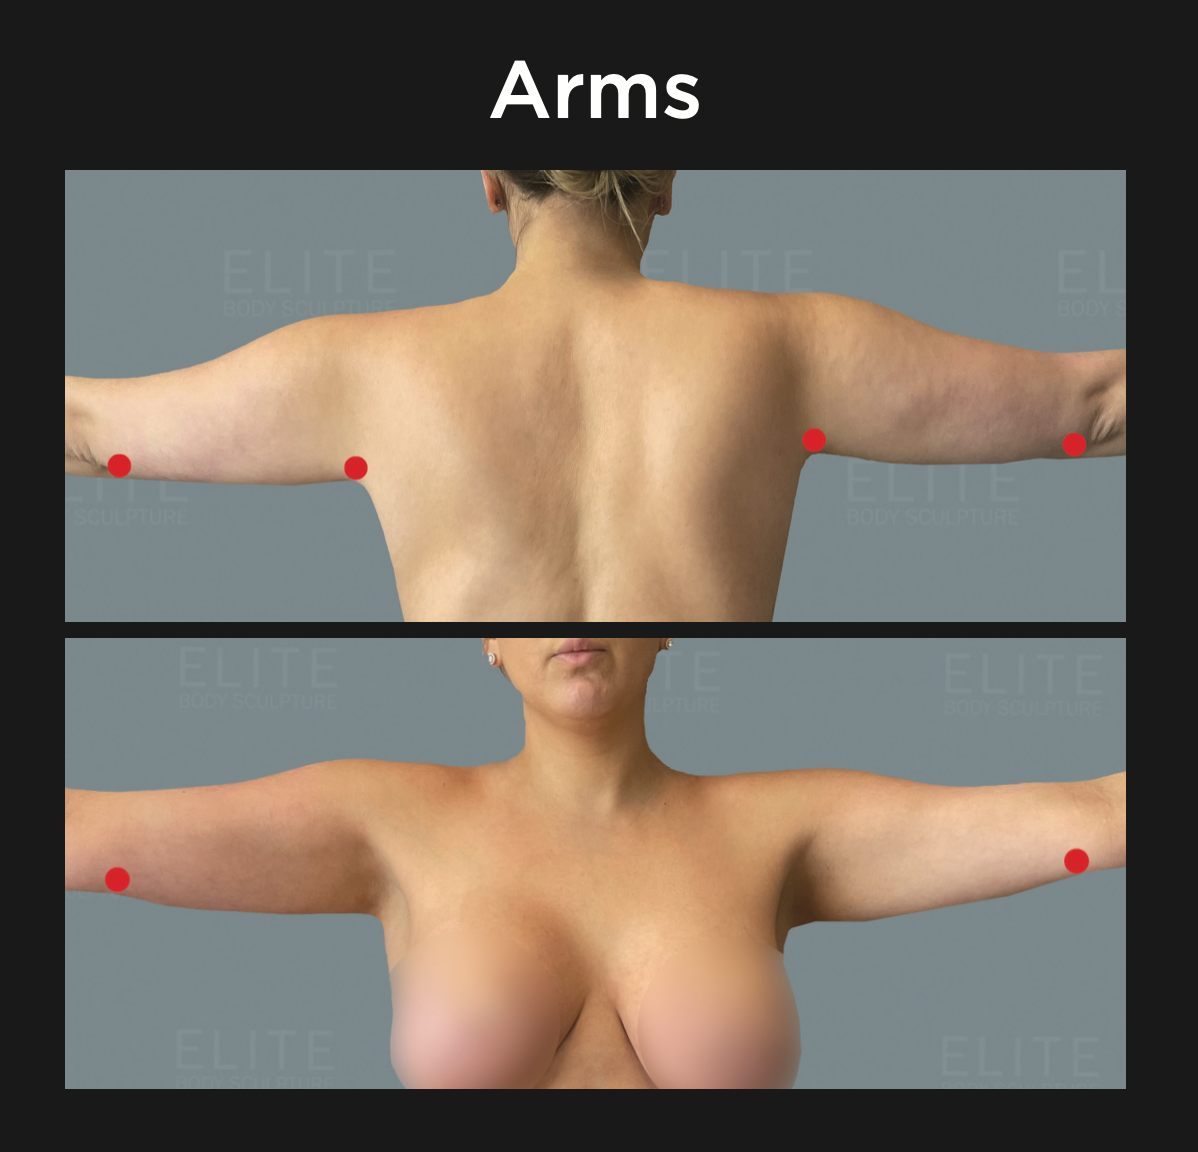 Permanent Arm Fat Removal  Arm Liposuction With AirSculpt®